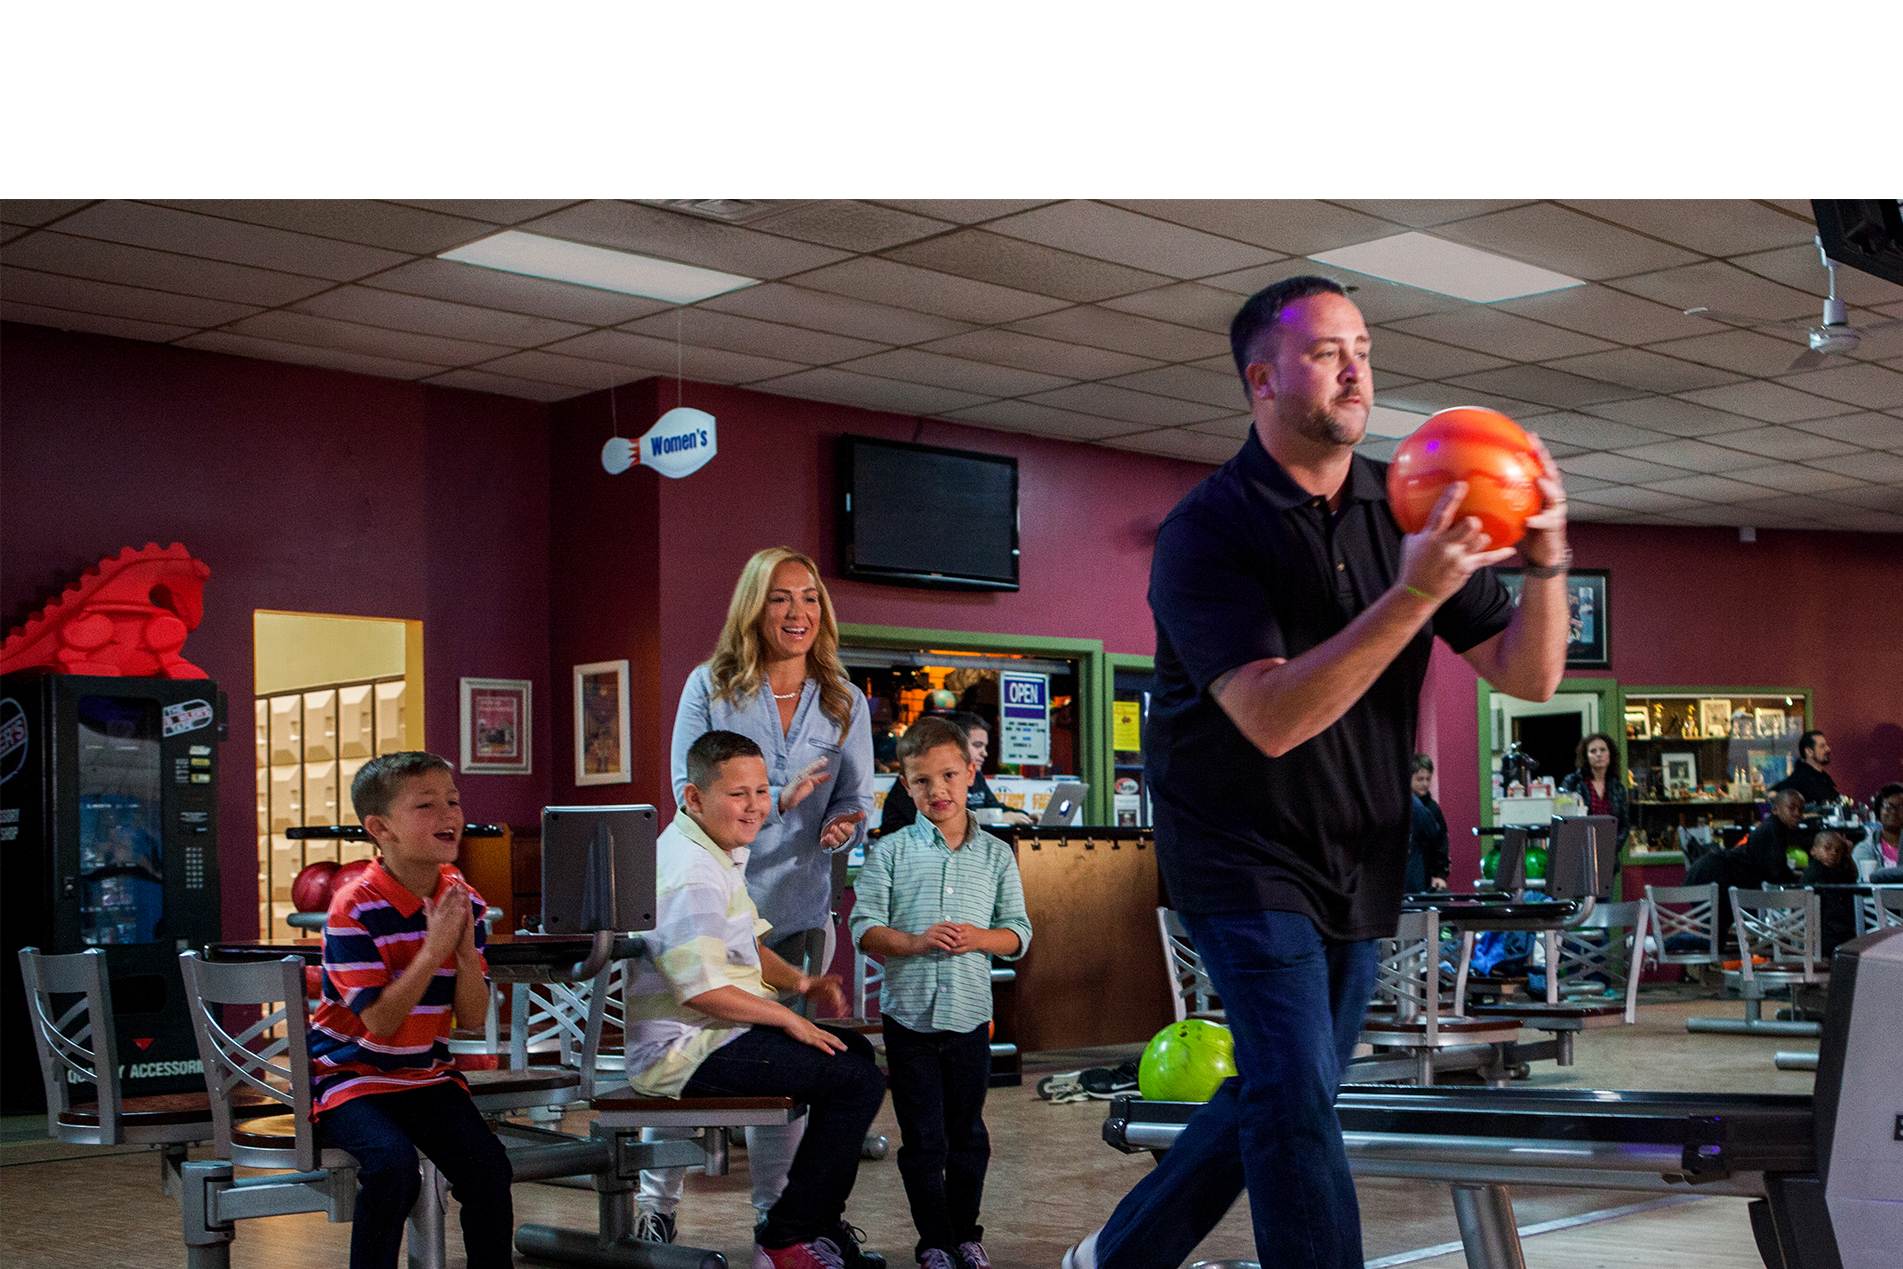 Parents and kids bowling